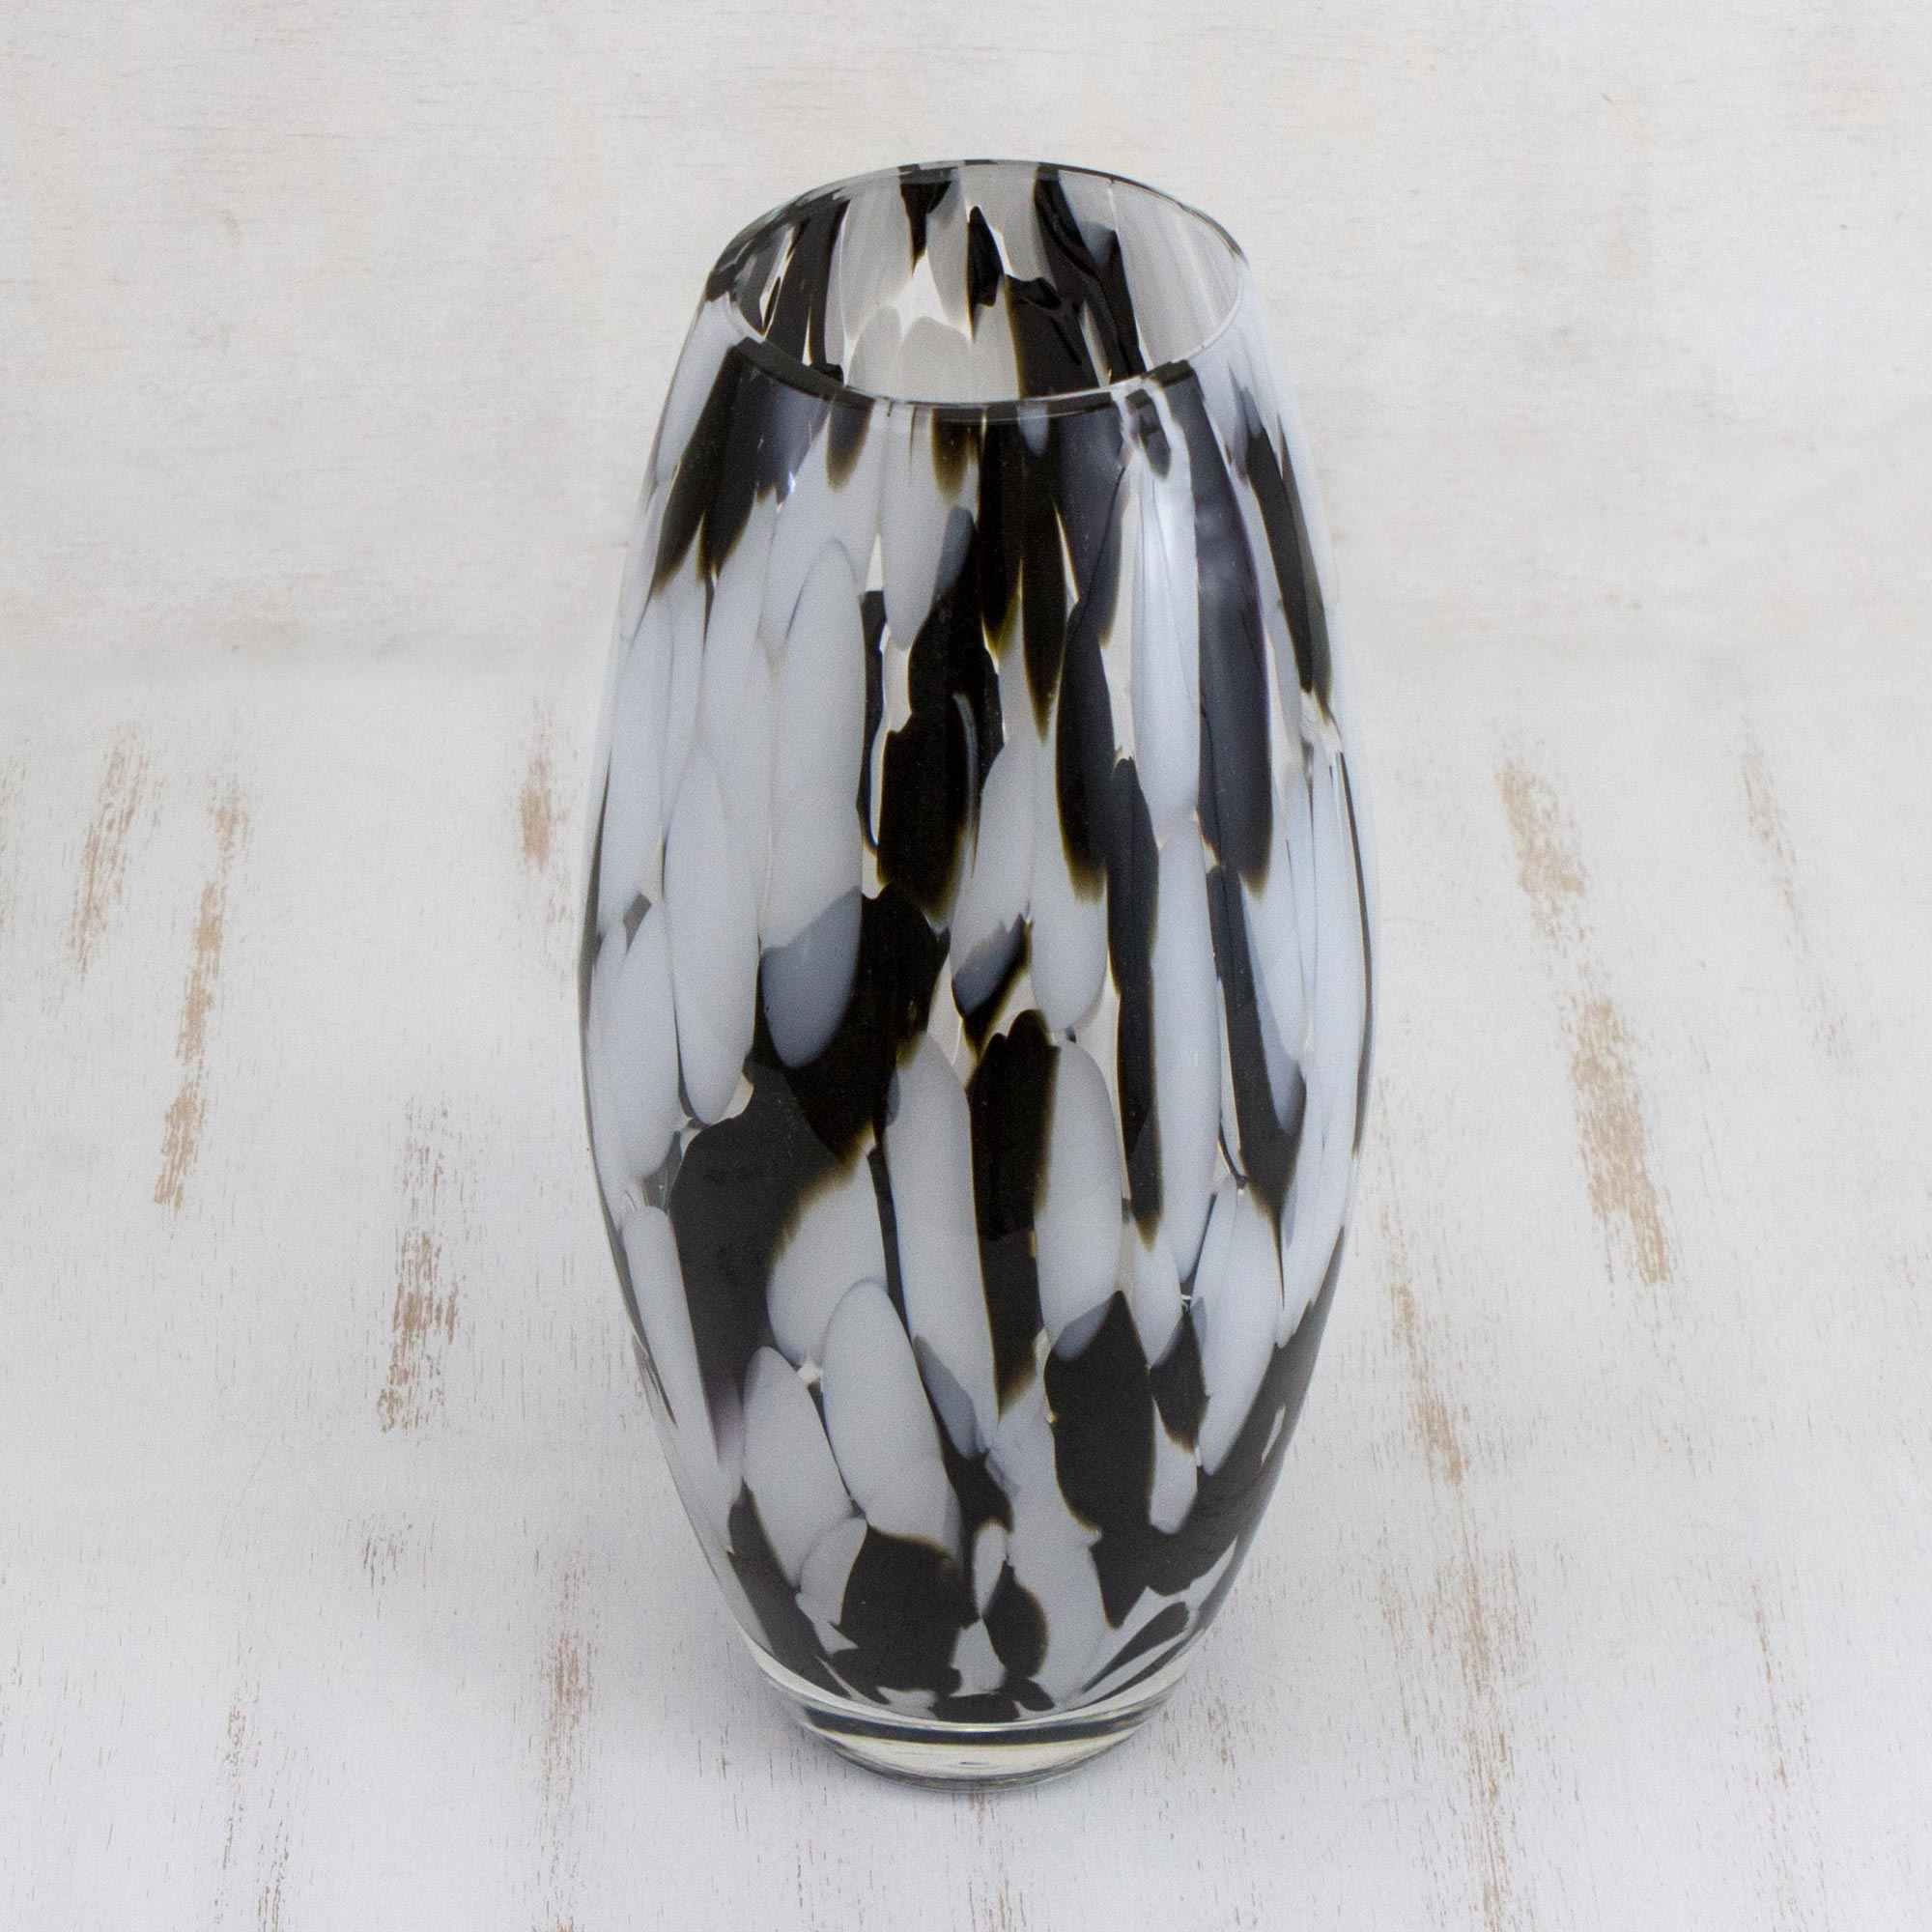 Unicef Market Hand Blown Murano Style Art Glass Vase In Black And